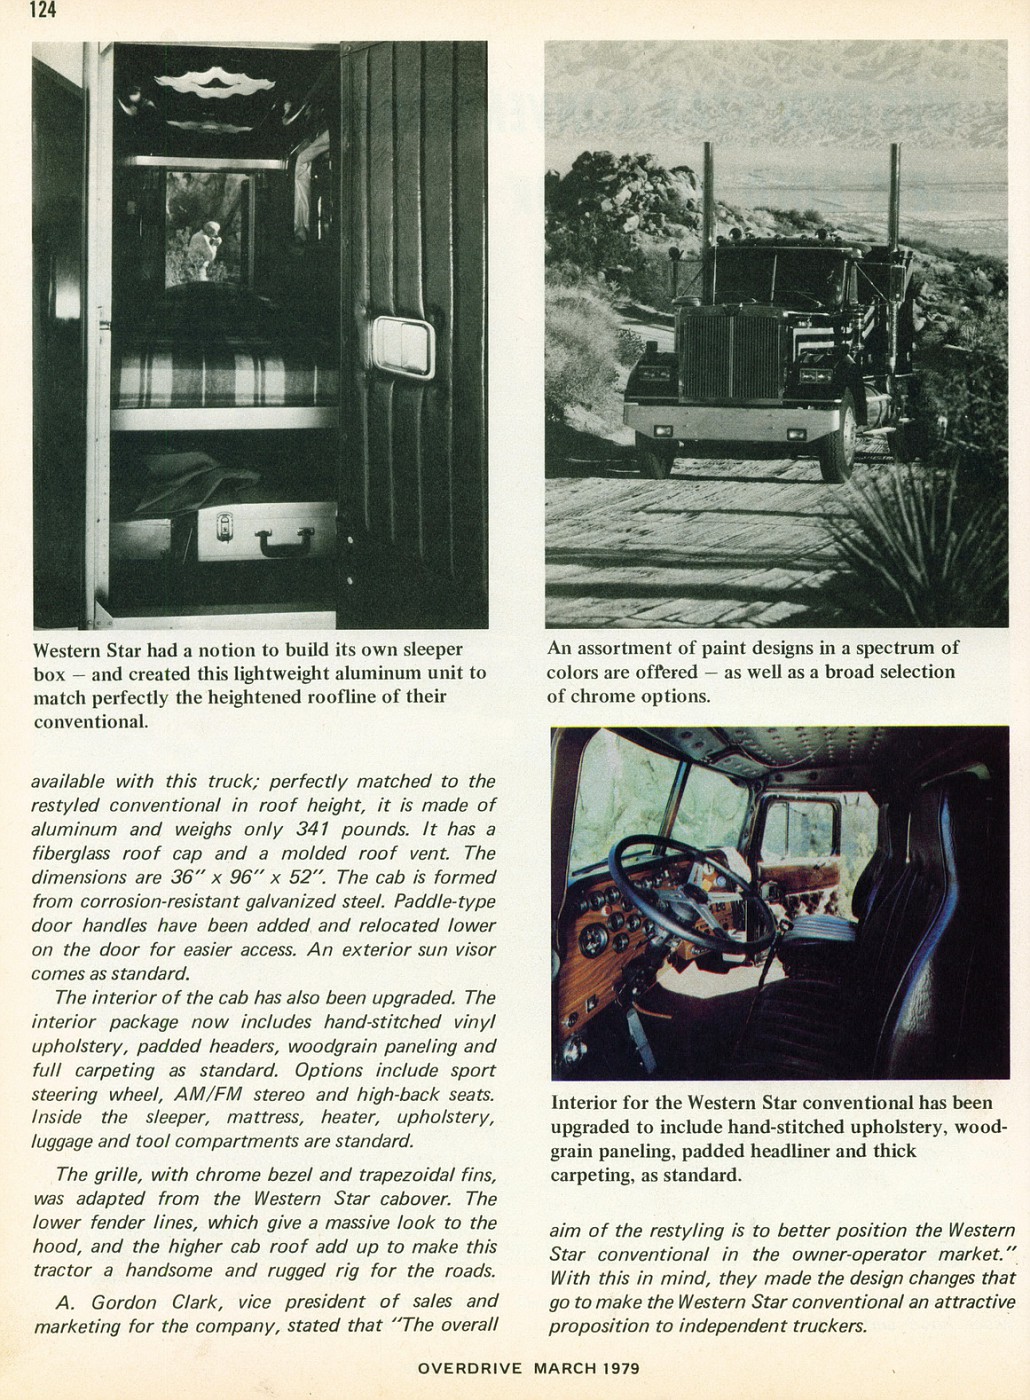 Photo March 1979 Western Star Conventional 2 03 Overdrive